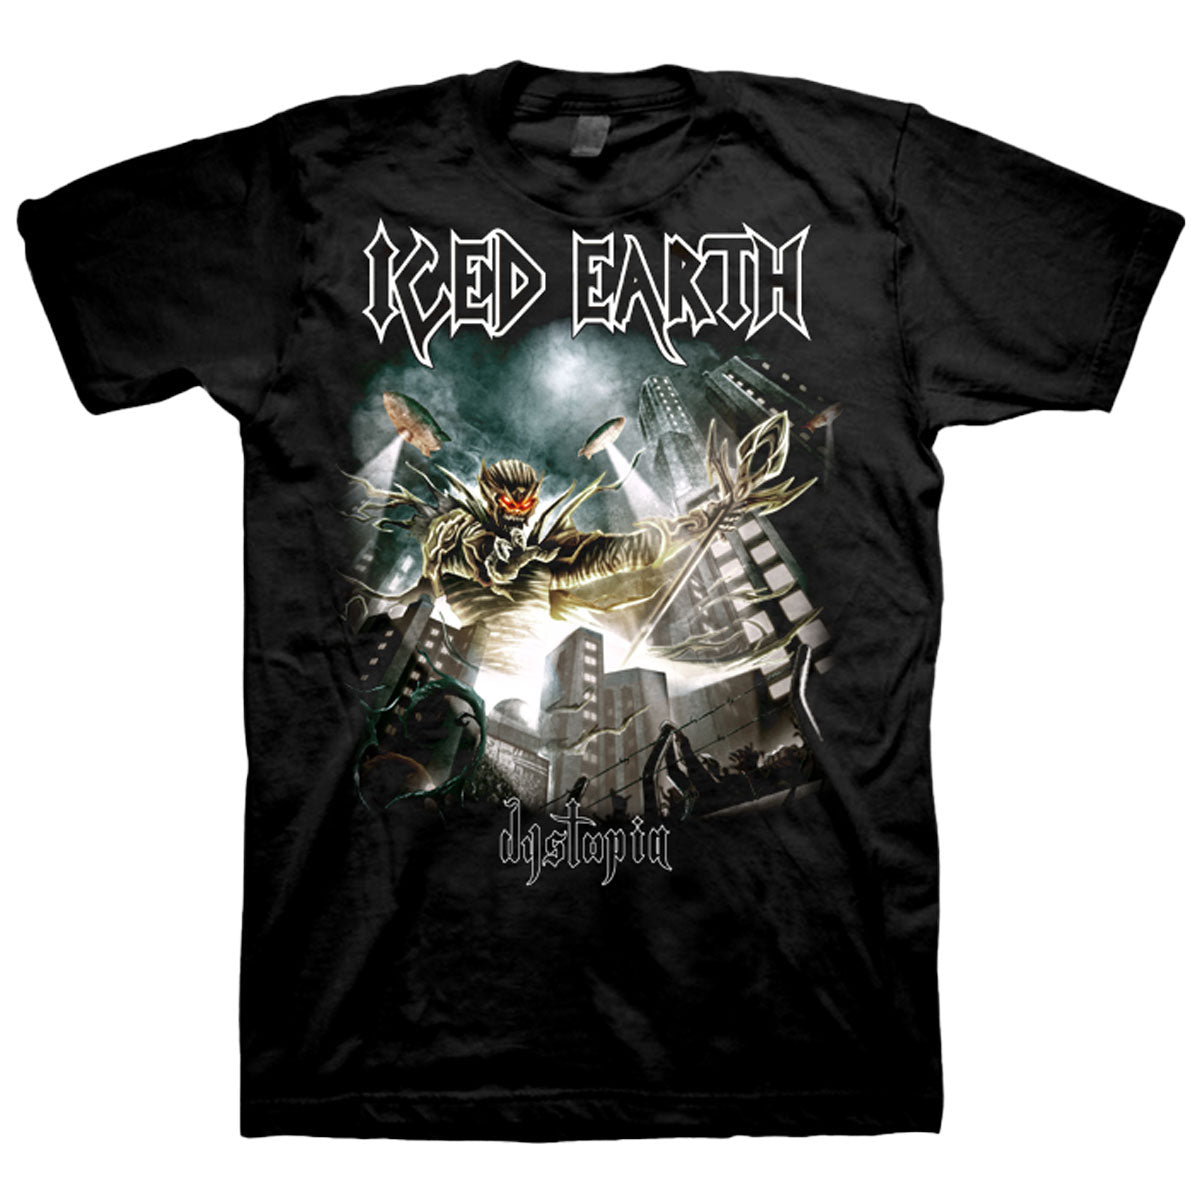 ICED EARTH Dystopia Tour T-Shirt